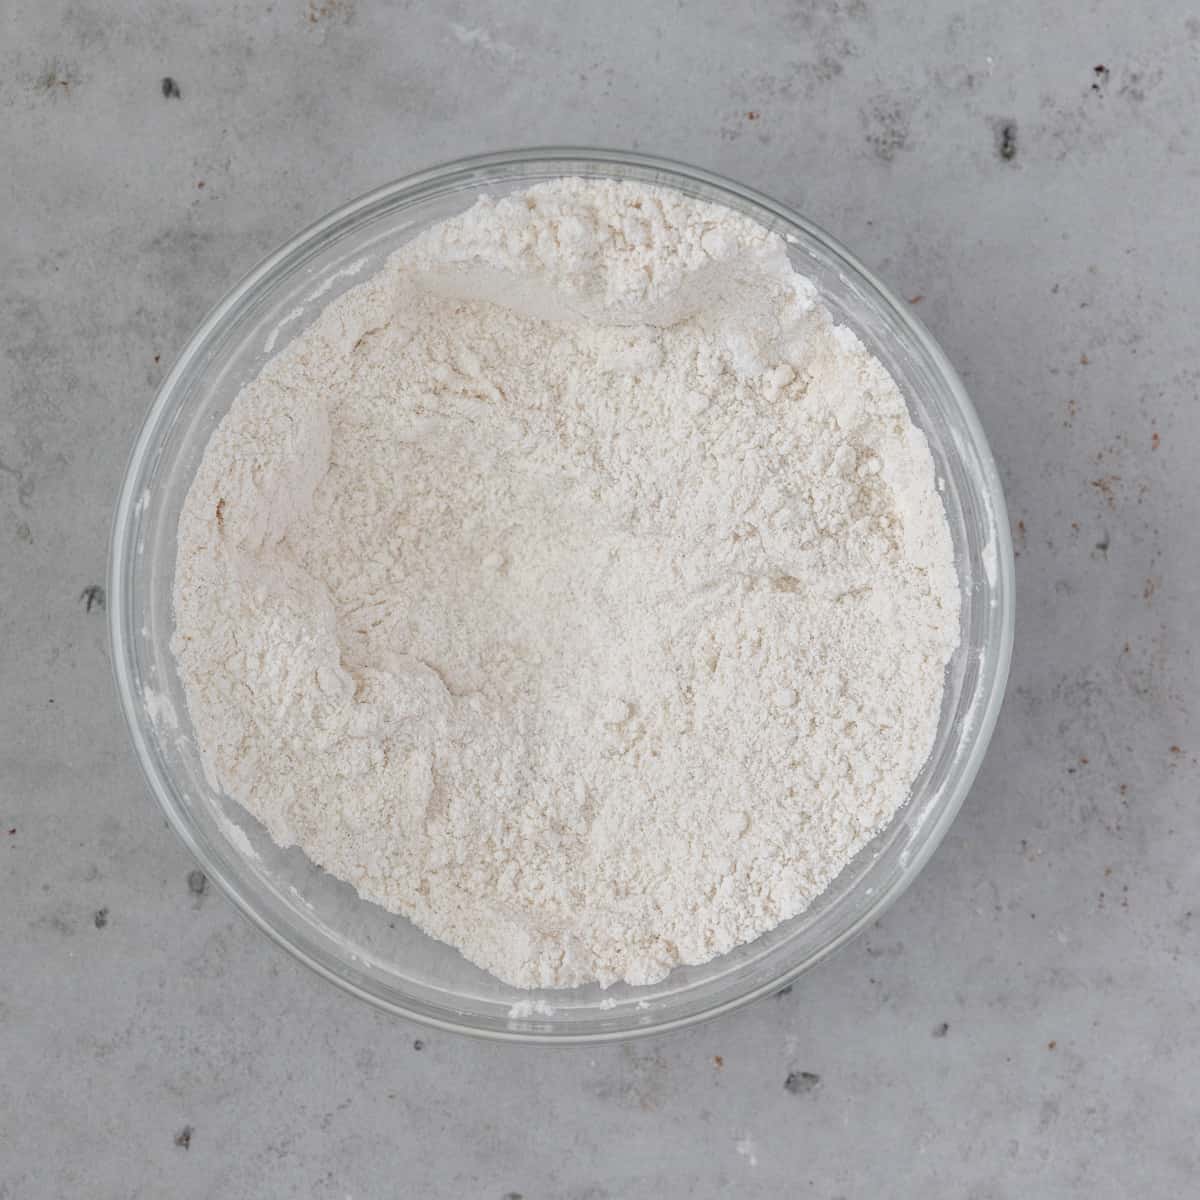 all of the dry ingredients combined in a glass bowl on a grey background